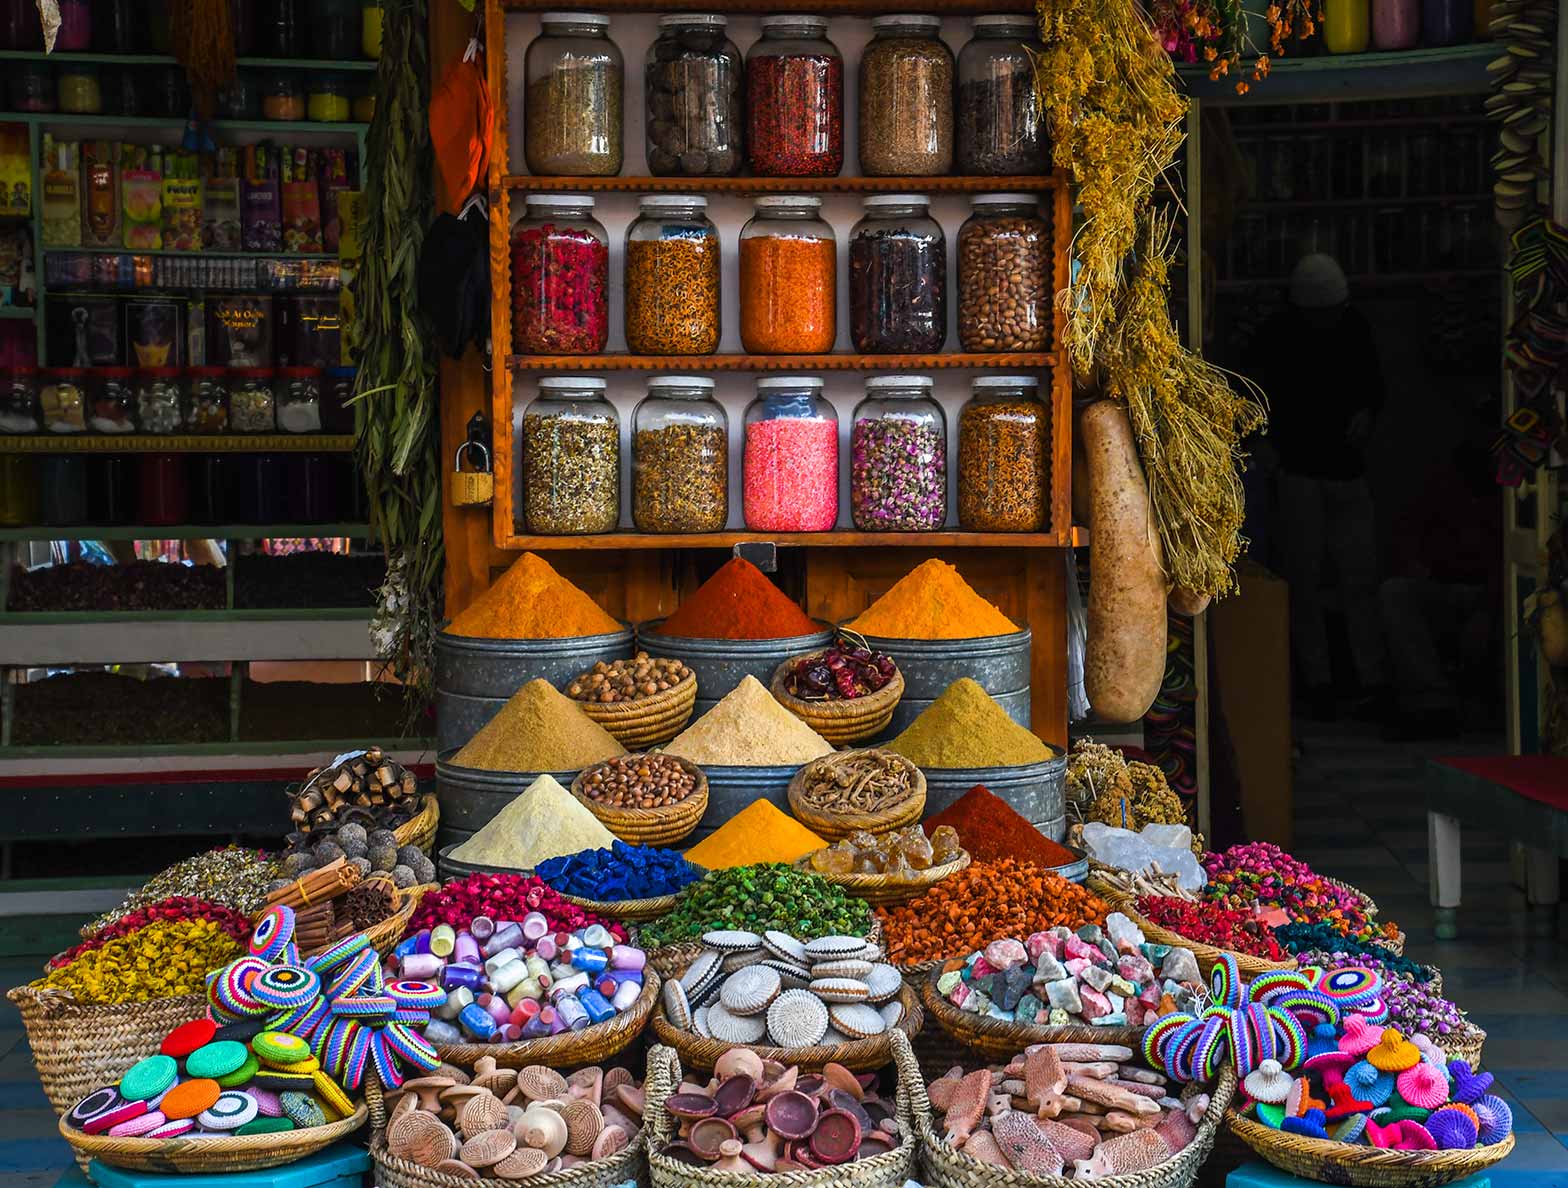 Moroccan herbs and spices